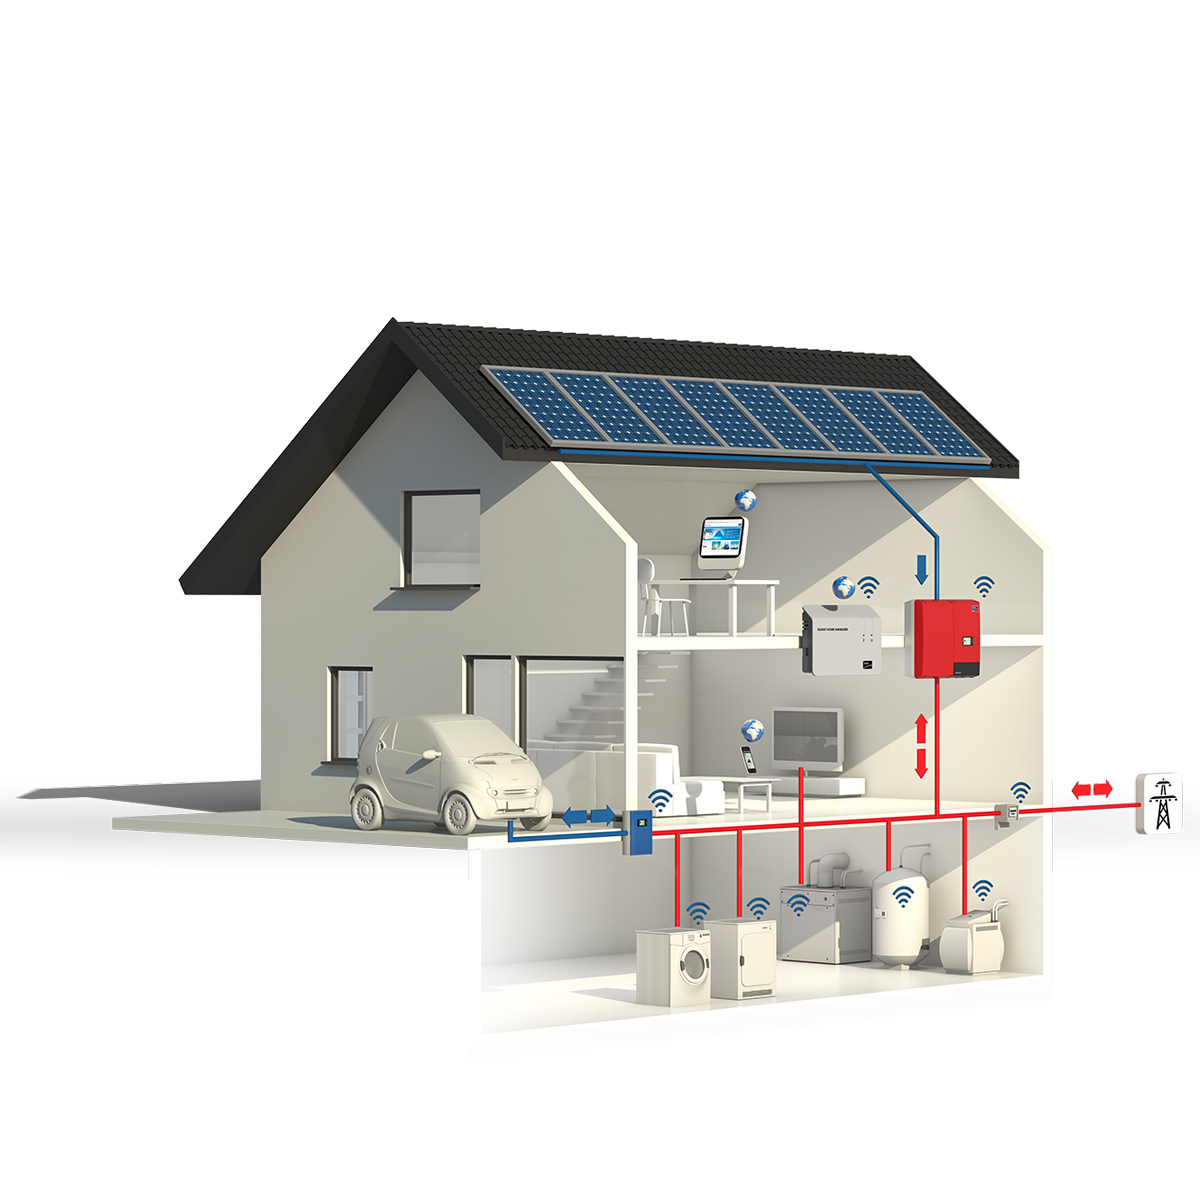 Harness the Power of the Sun: Complete Set Solar Energy System for Your Home